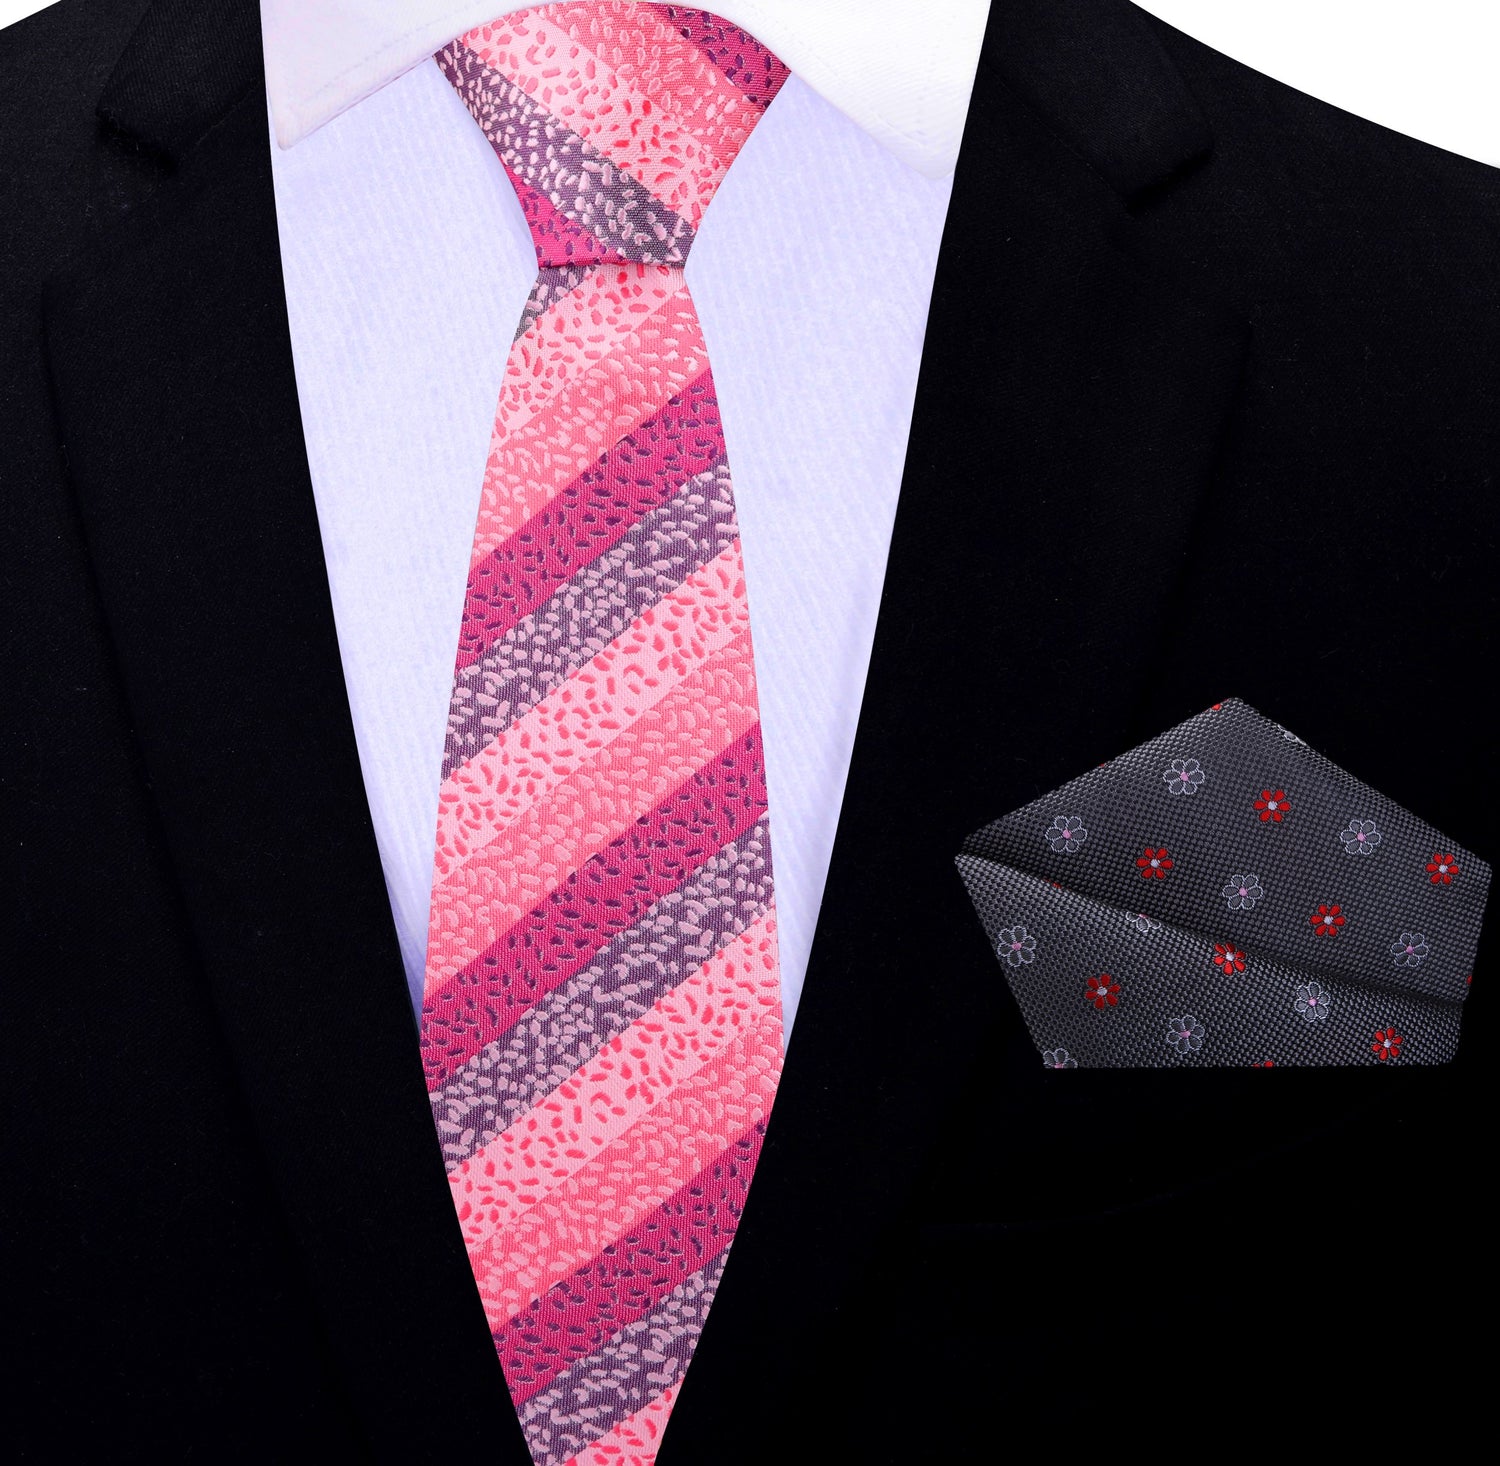 Thin Tie: Shades of Pink with stripes and texture silk tie and accenting grey and pink floral pocket square